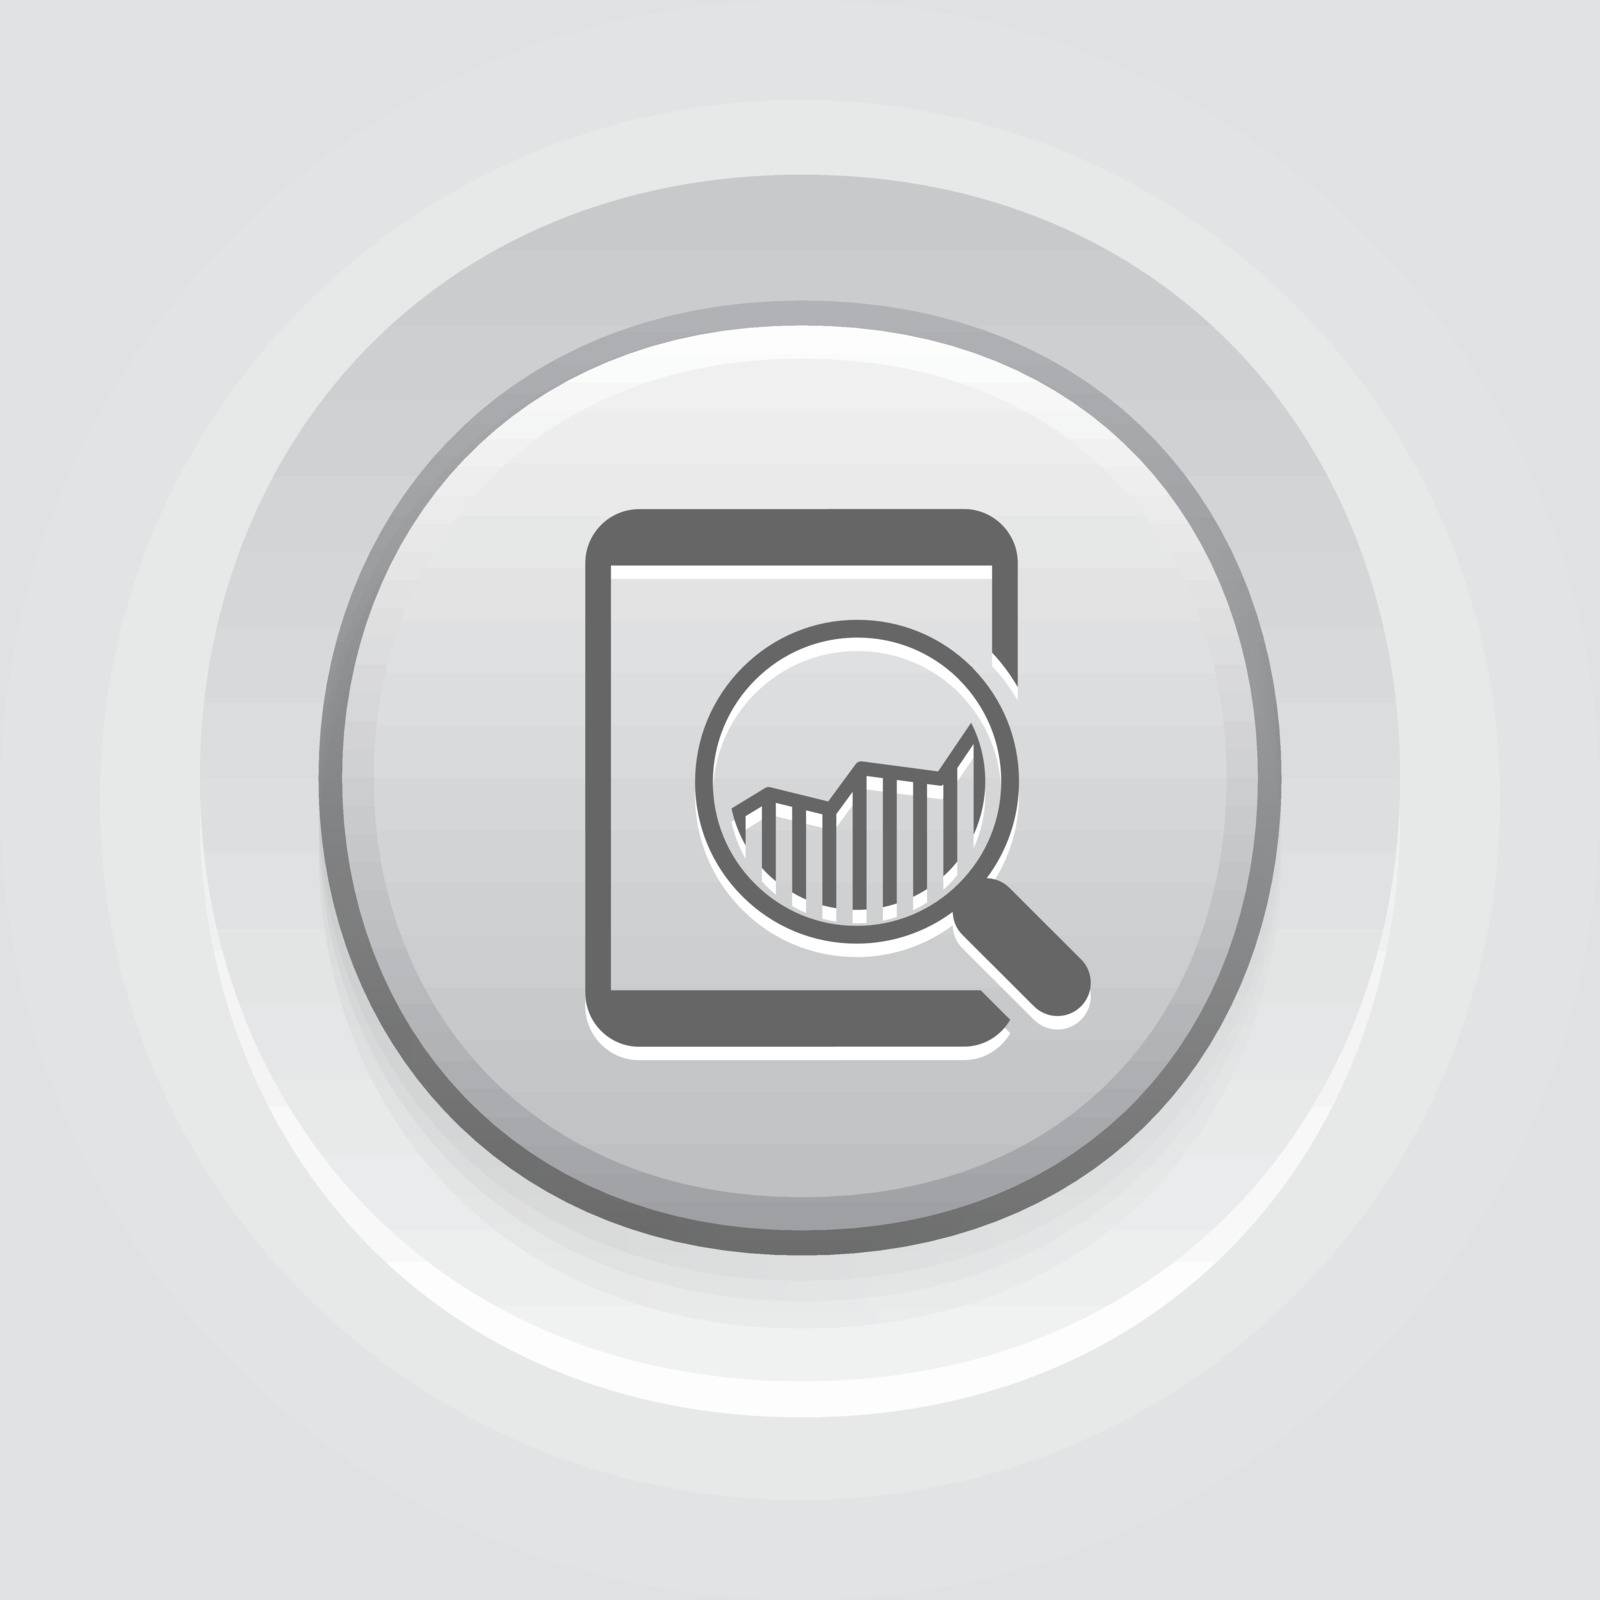 Business Analysis Icon. Grey Button Design. Business Concept